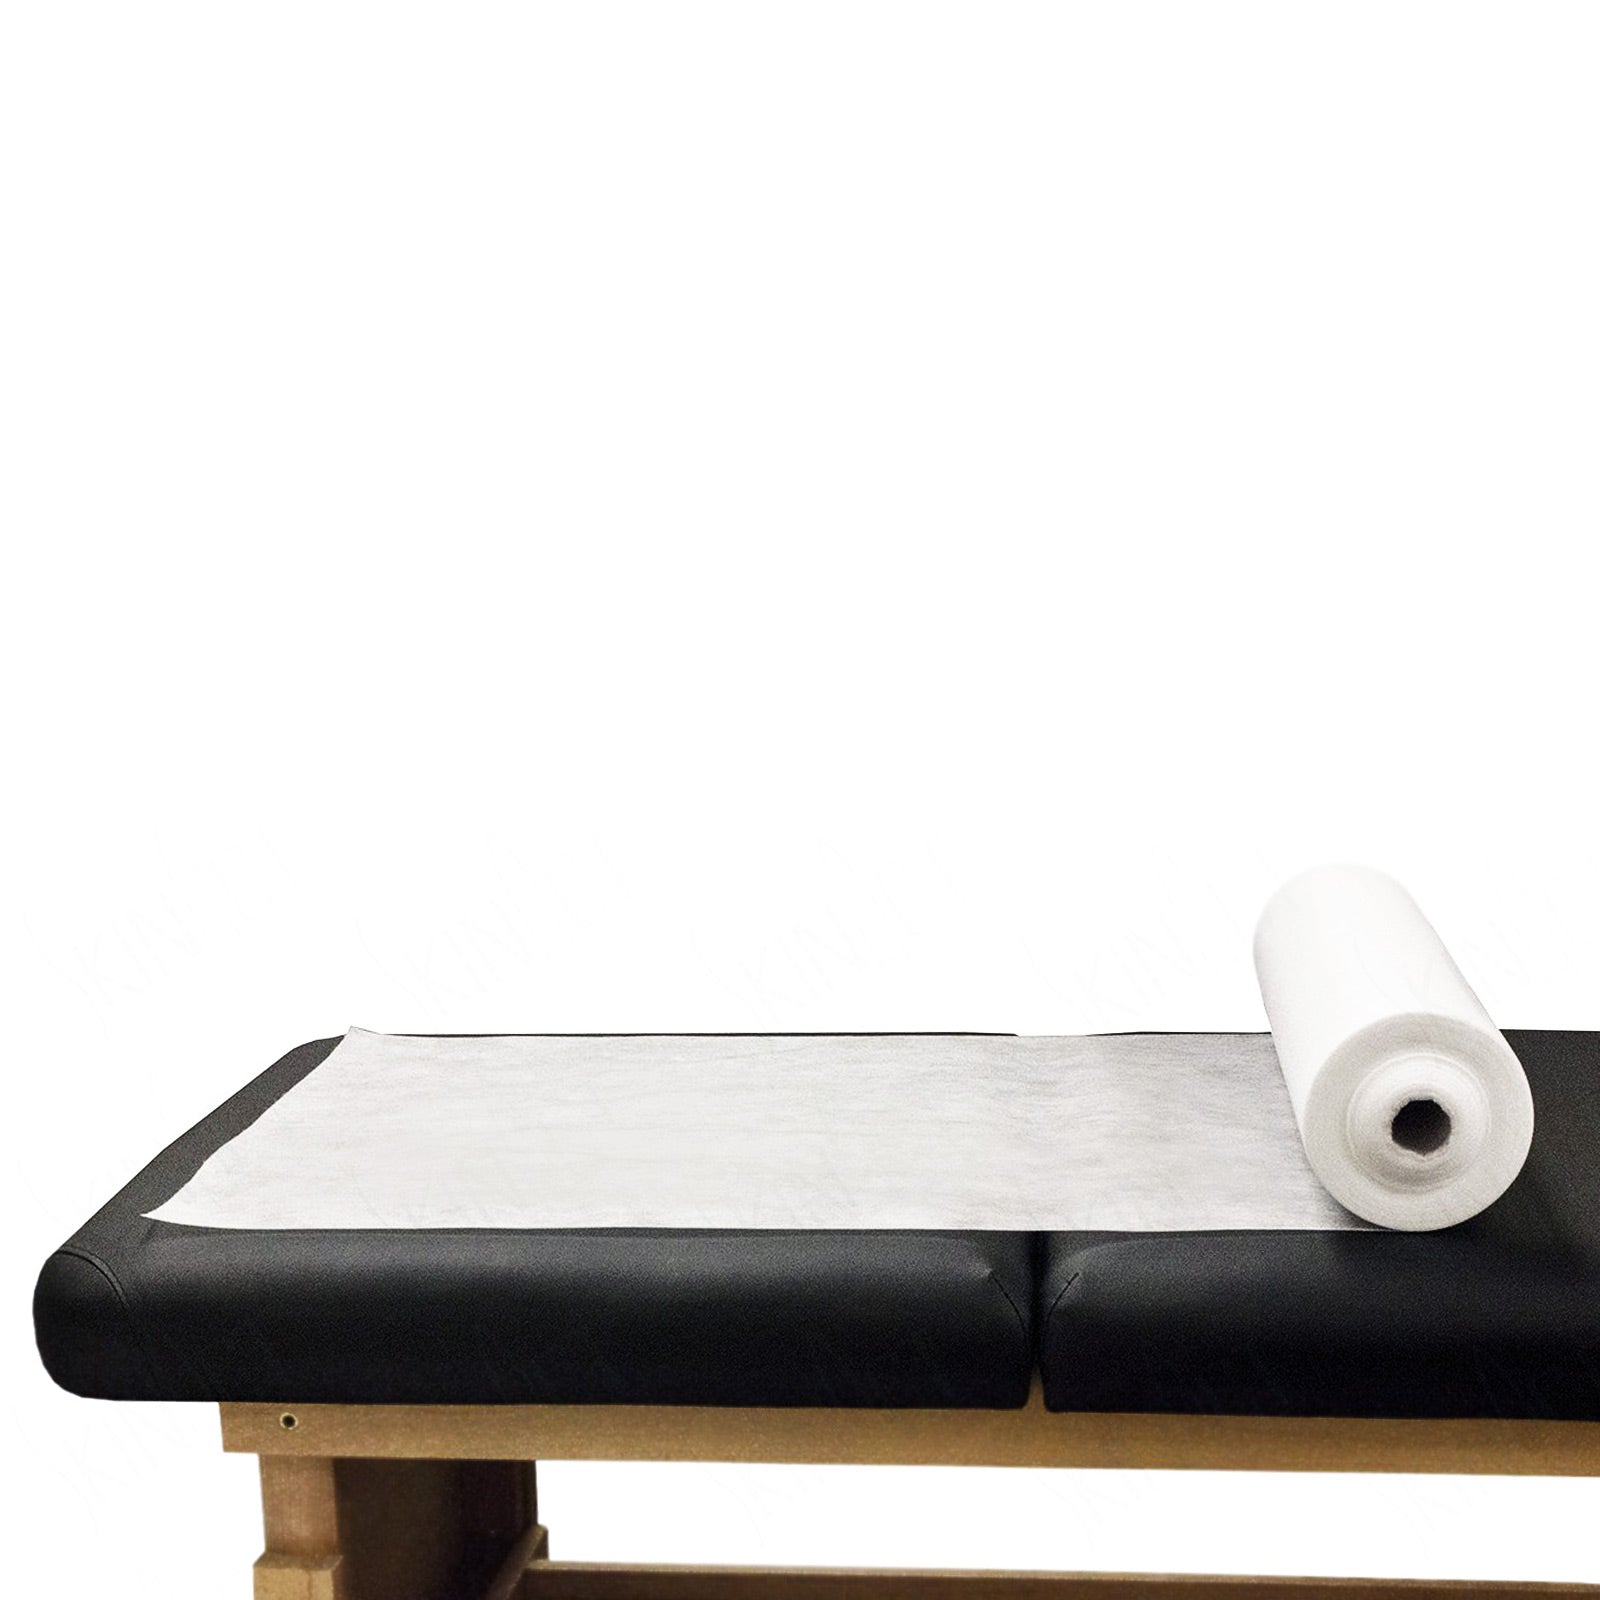 Forever Beauty 1 Roll / 45pcs Disposable Massage Table Sheet Cover 180cm x 80cm - SILBERSHELL